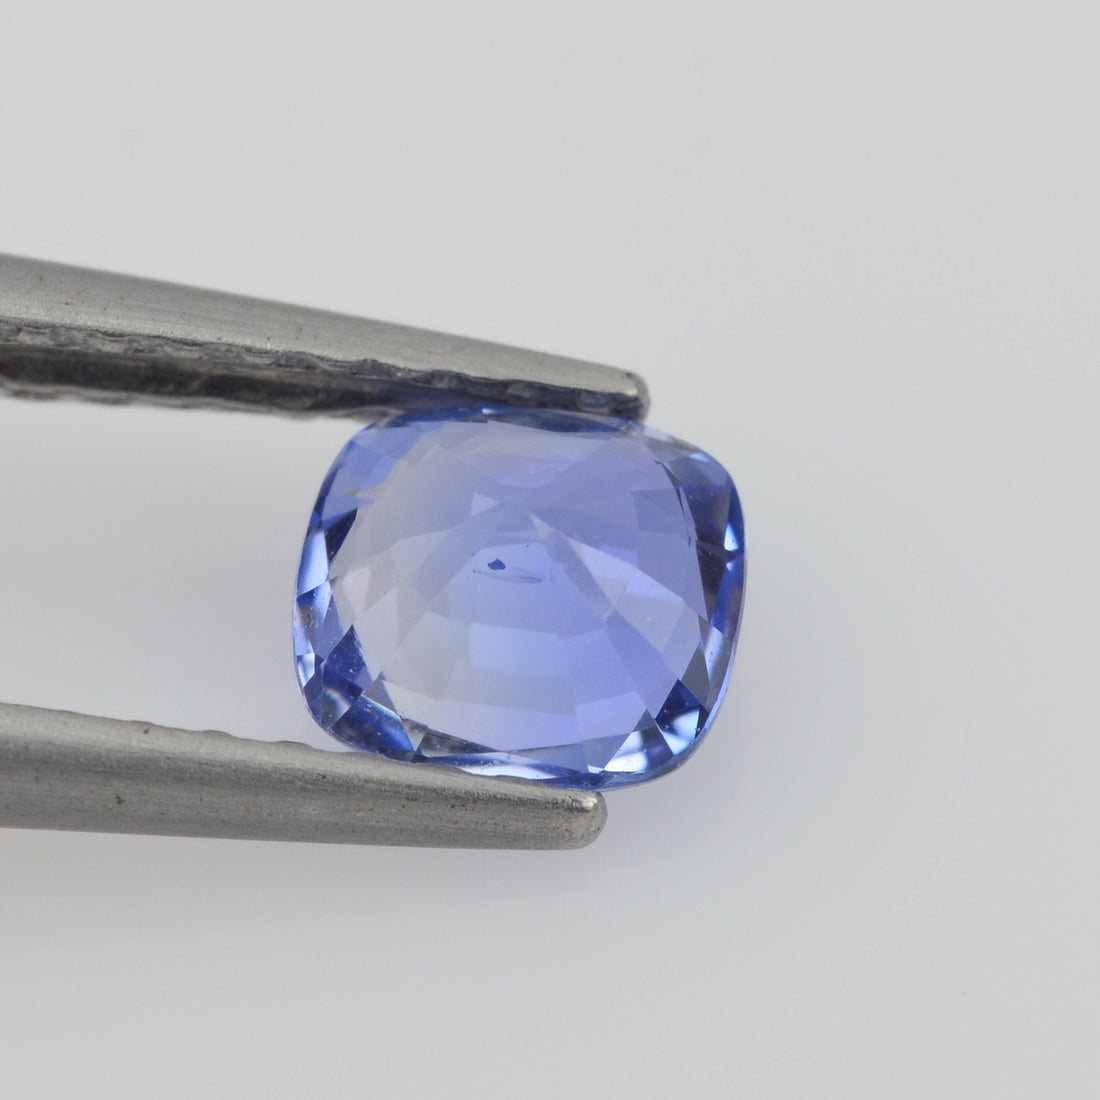 0.56-0.57 cts Natural Blue Sapphire Loose Gemstone Oval Cut